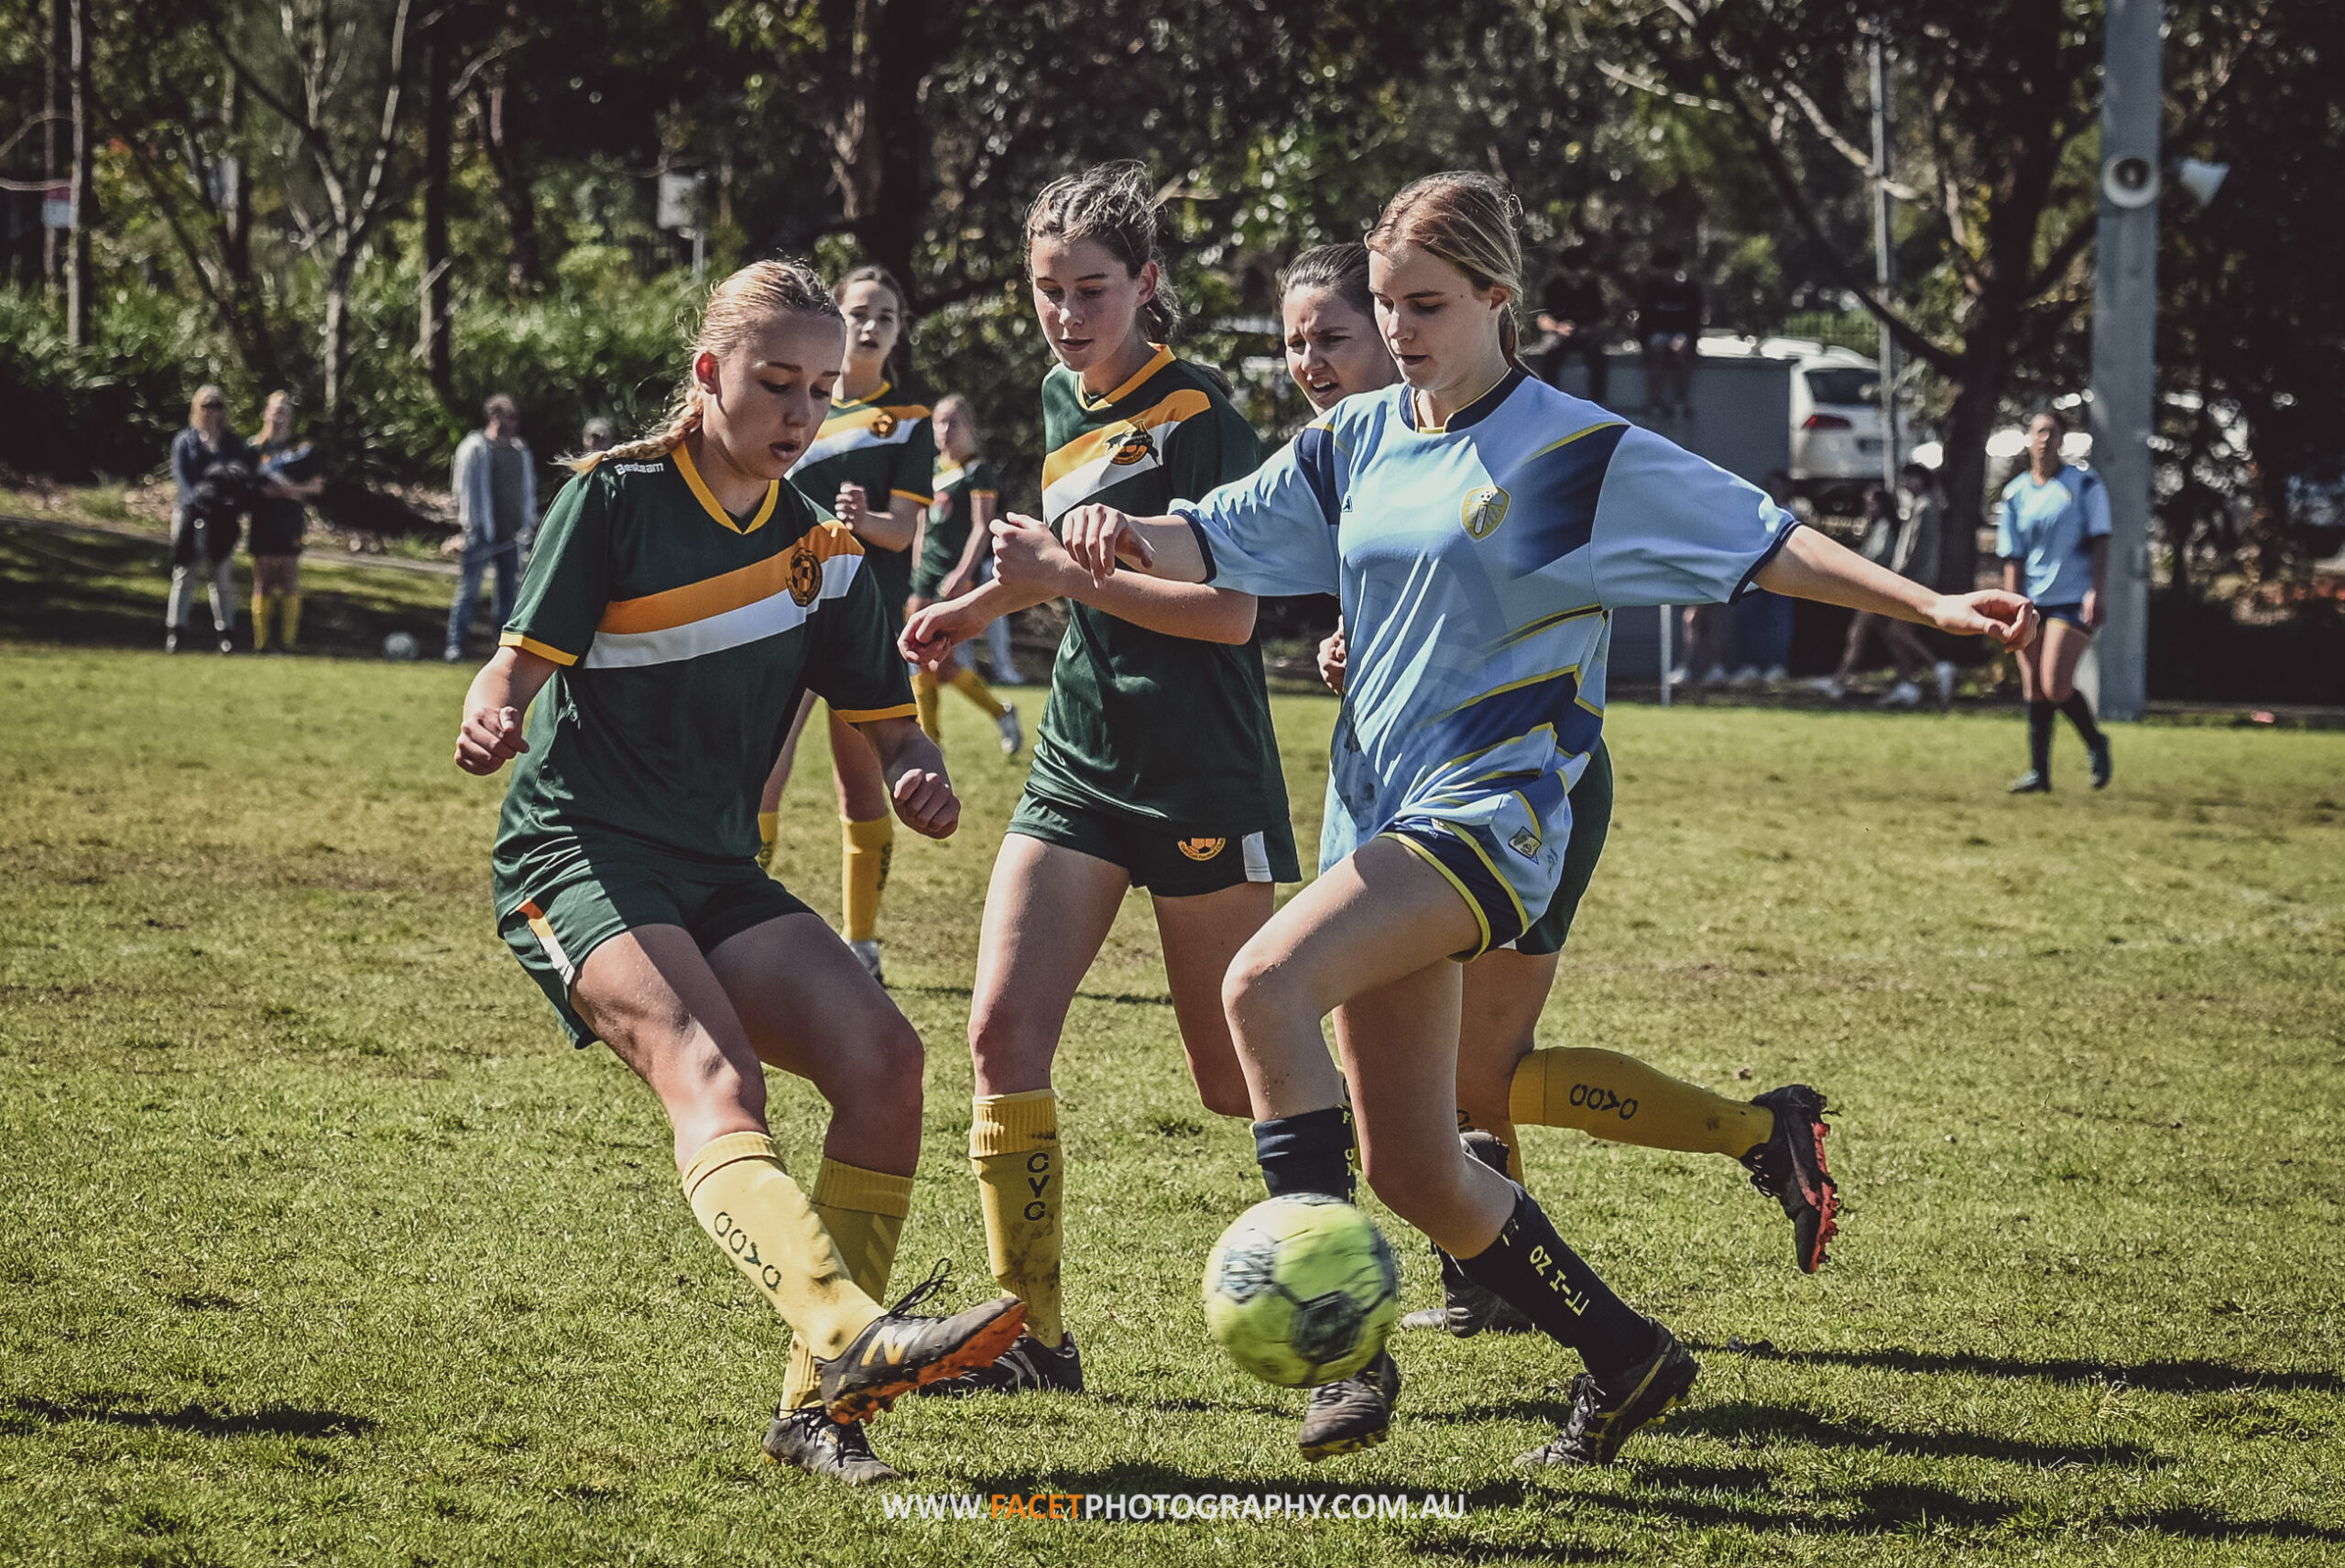 NSW Football Legacy Fund: Action from the 2022 MWFA Girls Grand Final Day, Curl Curl and Beacon Hill are the participating clubs. Photo credit: Jeremy Denham